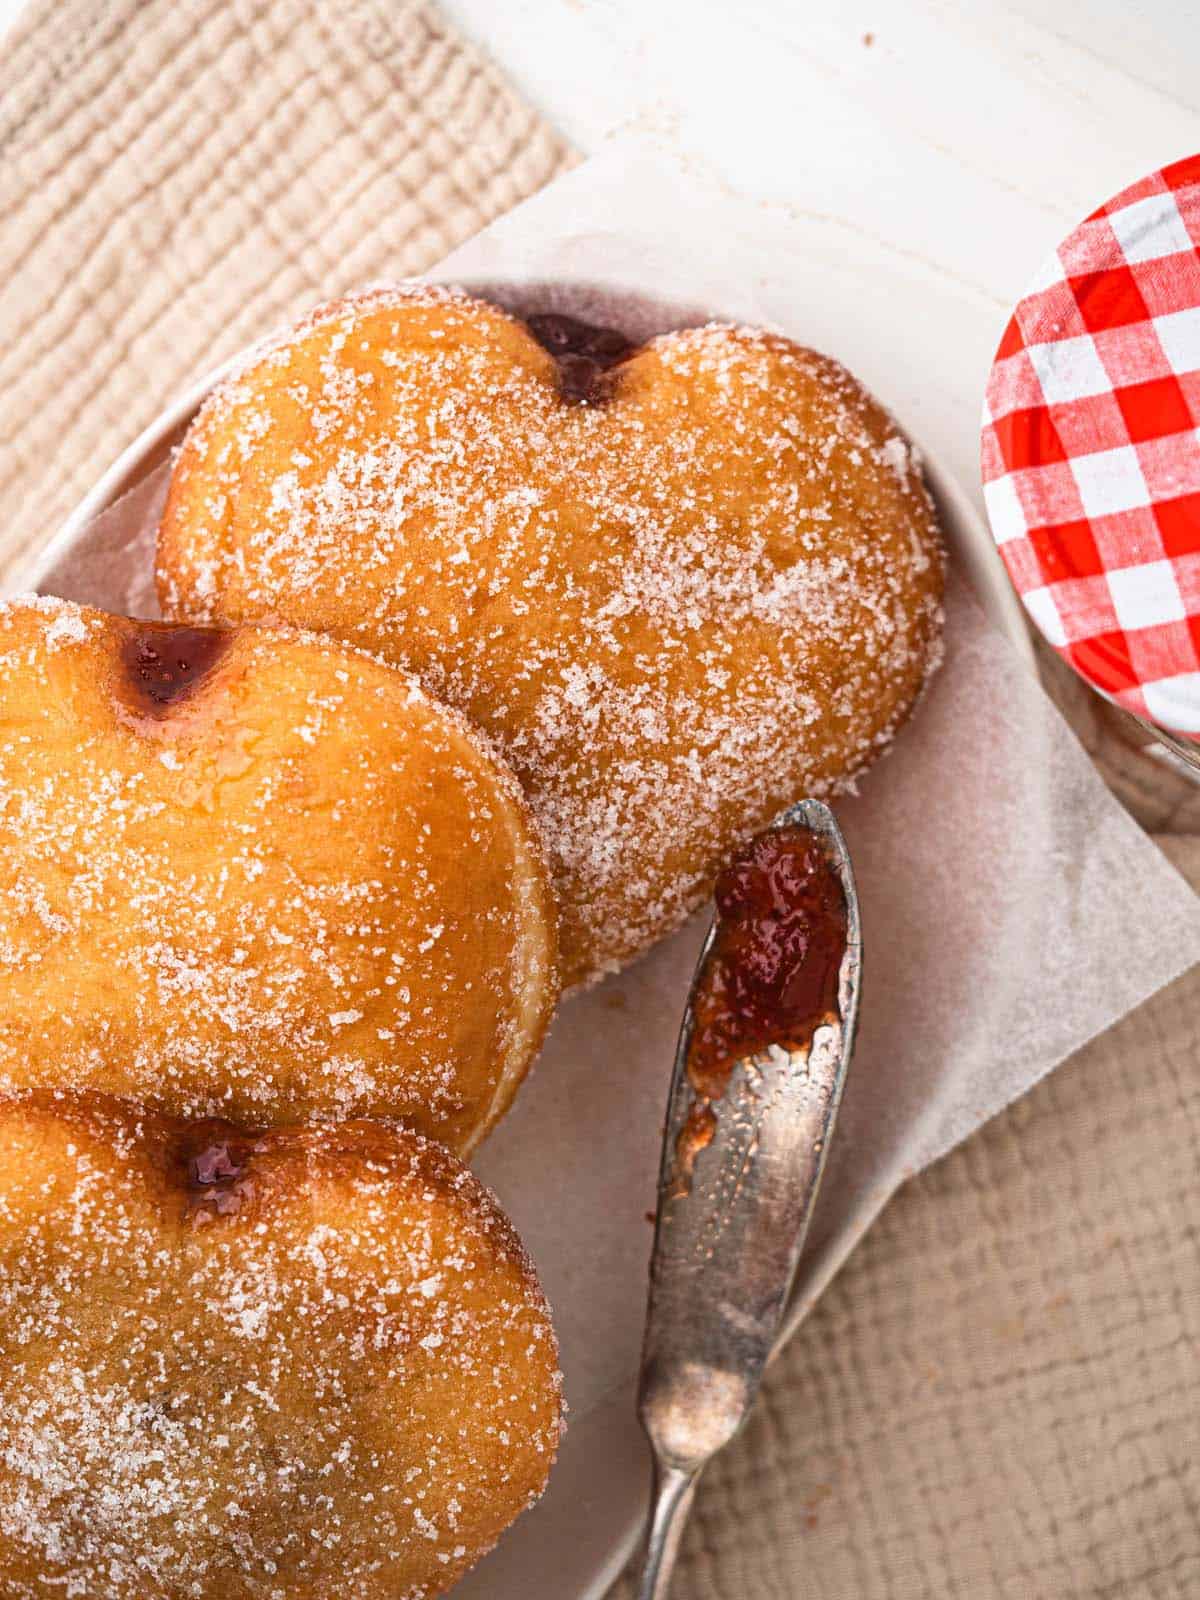 heart shaped jelly donuts filled with strawberry jam